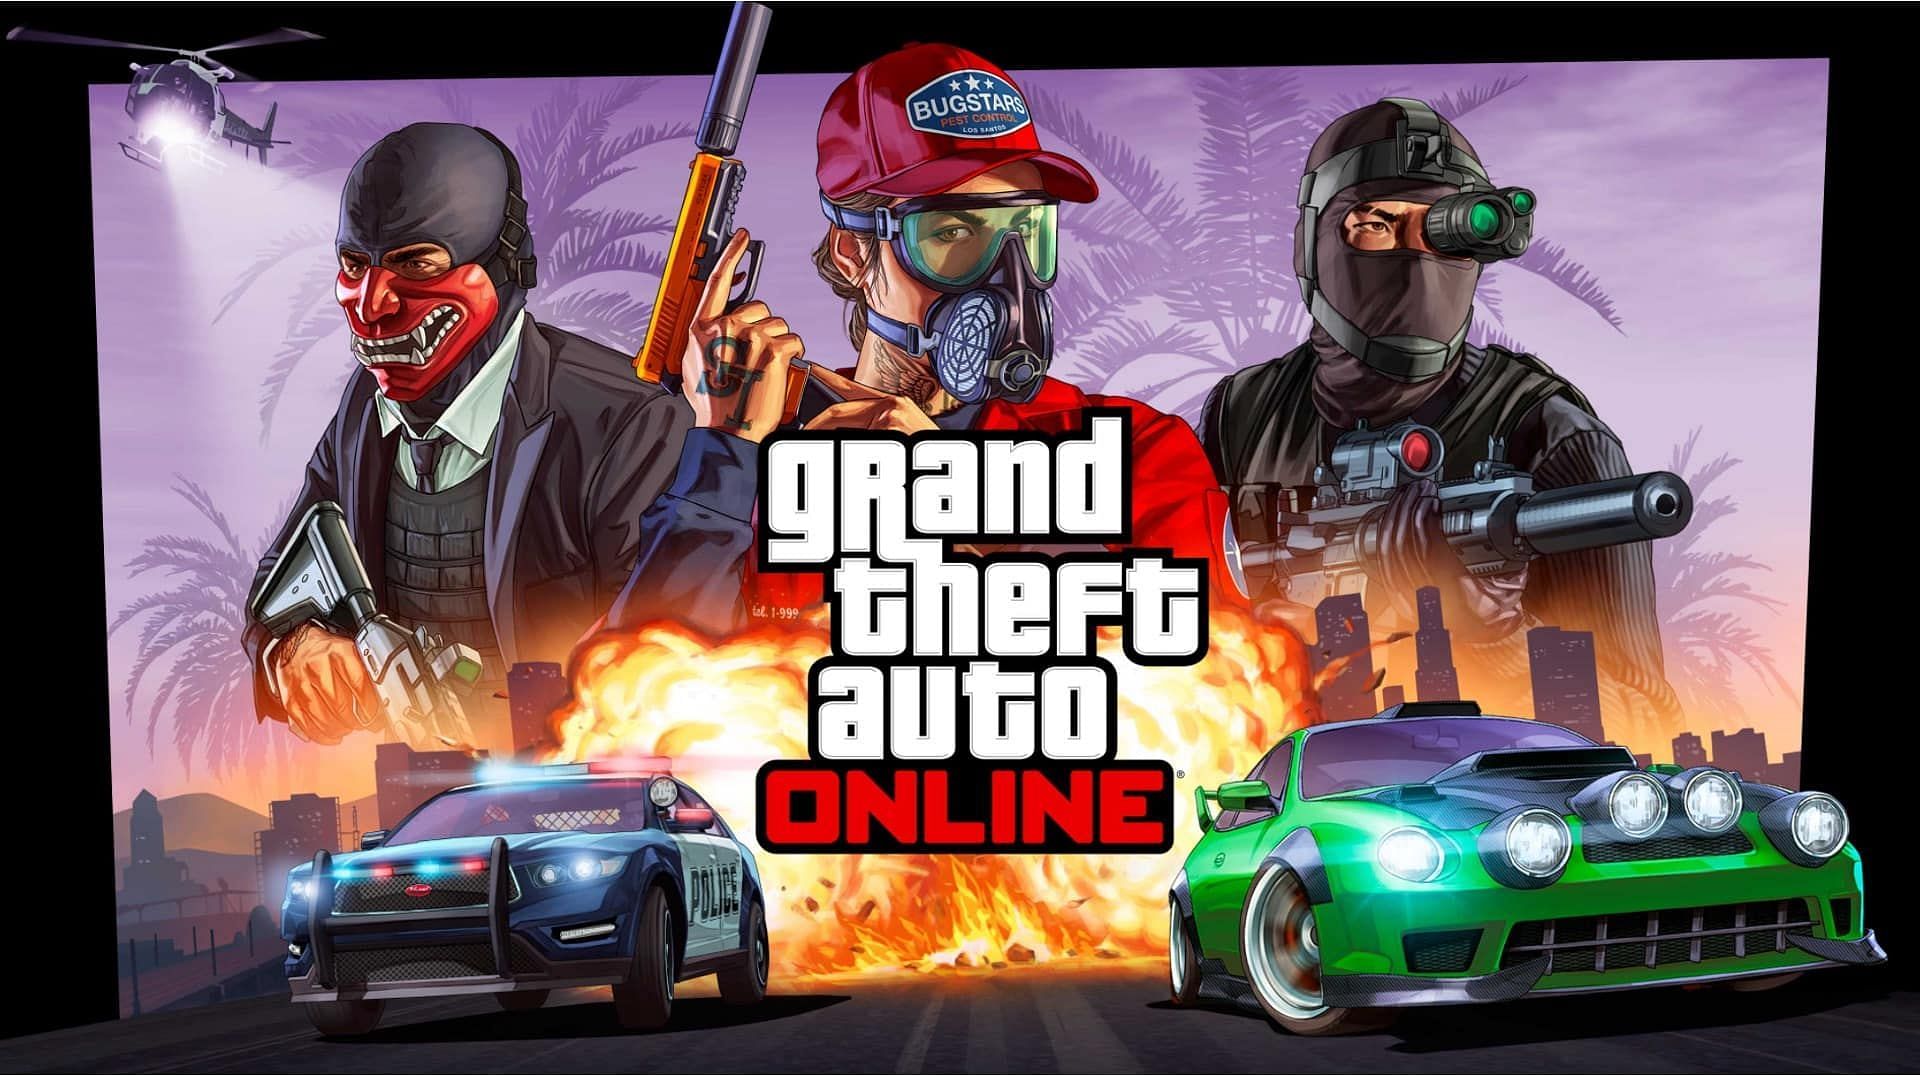 Online is too profitable to ignore (Image via Rockstar Games)